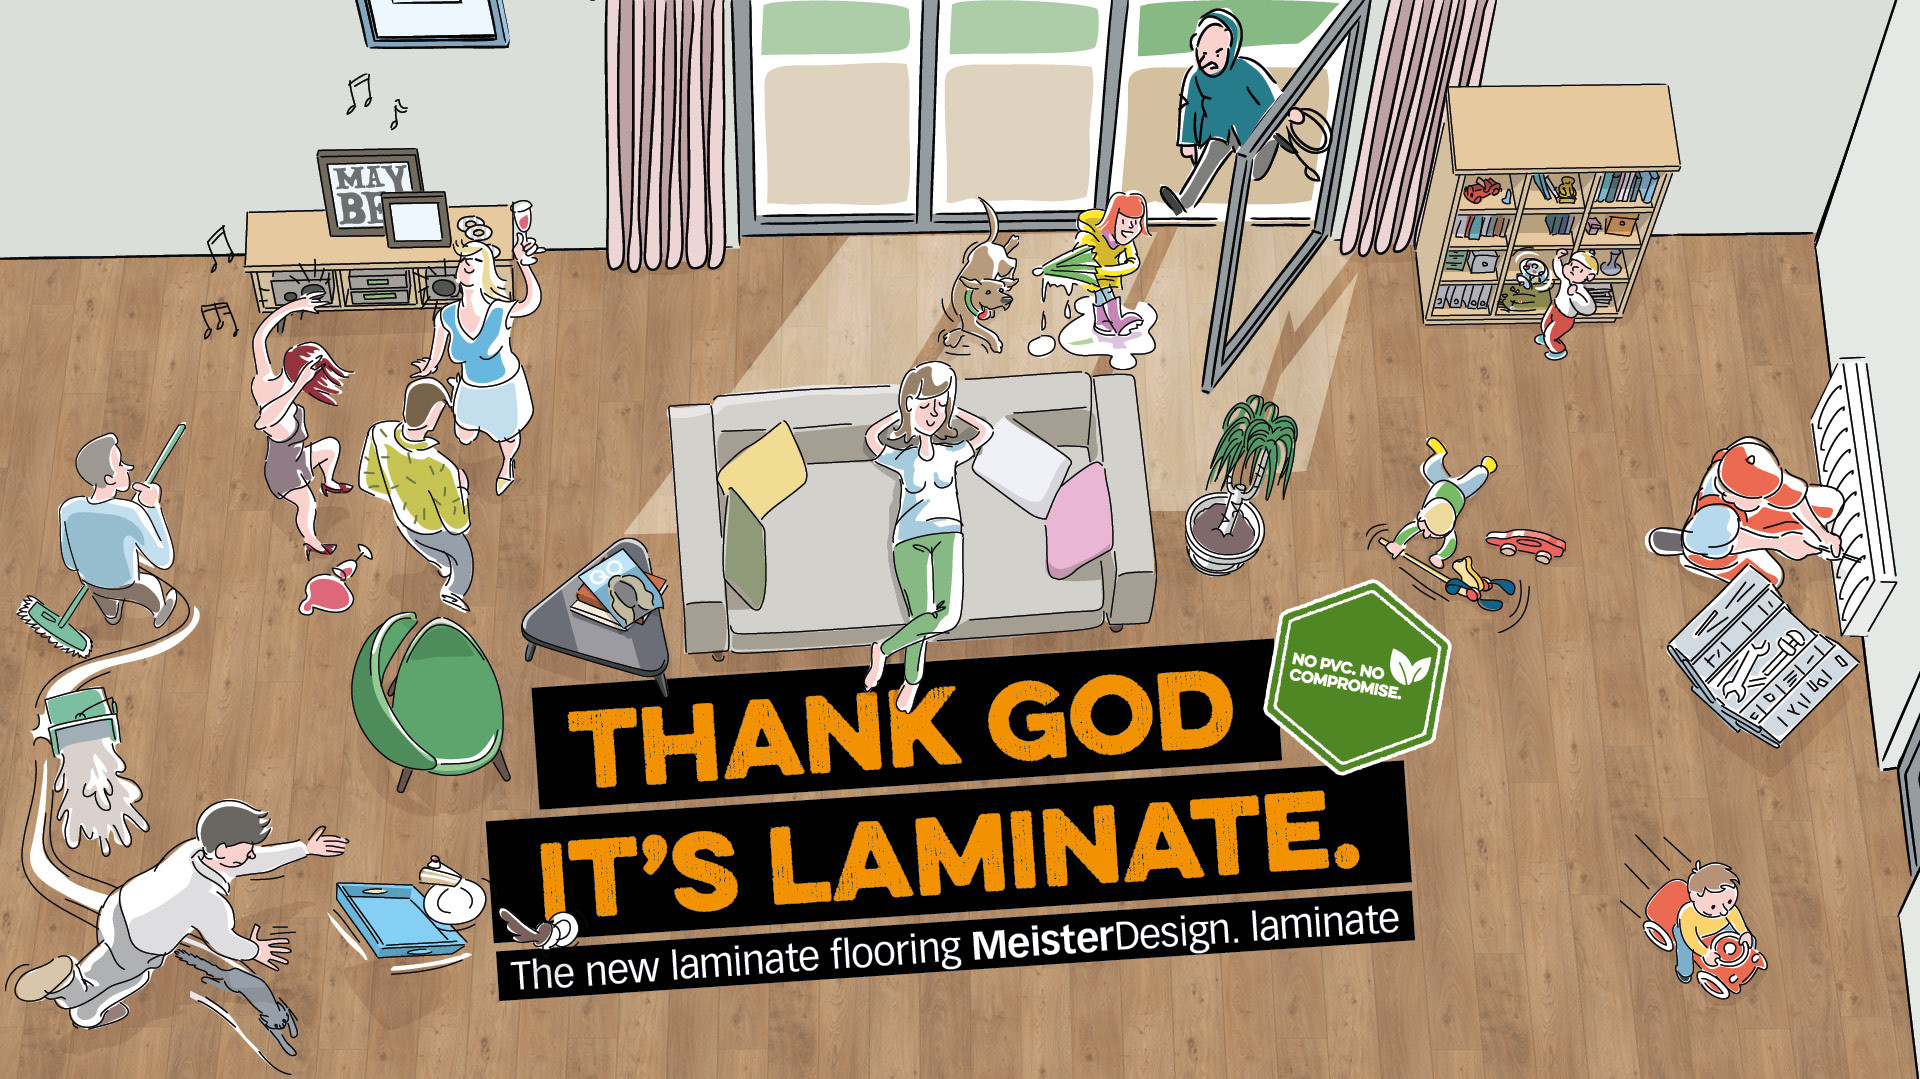 The new laminate flooring by MEISTER